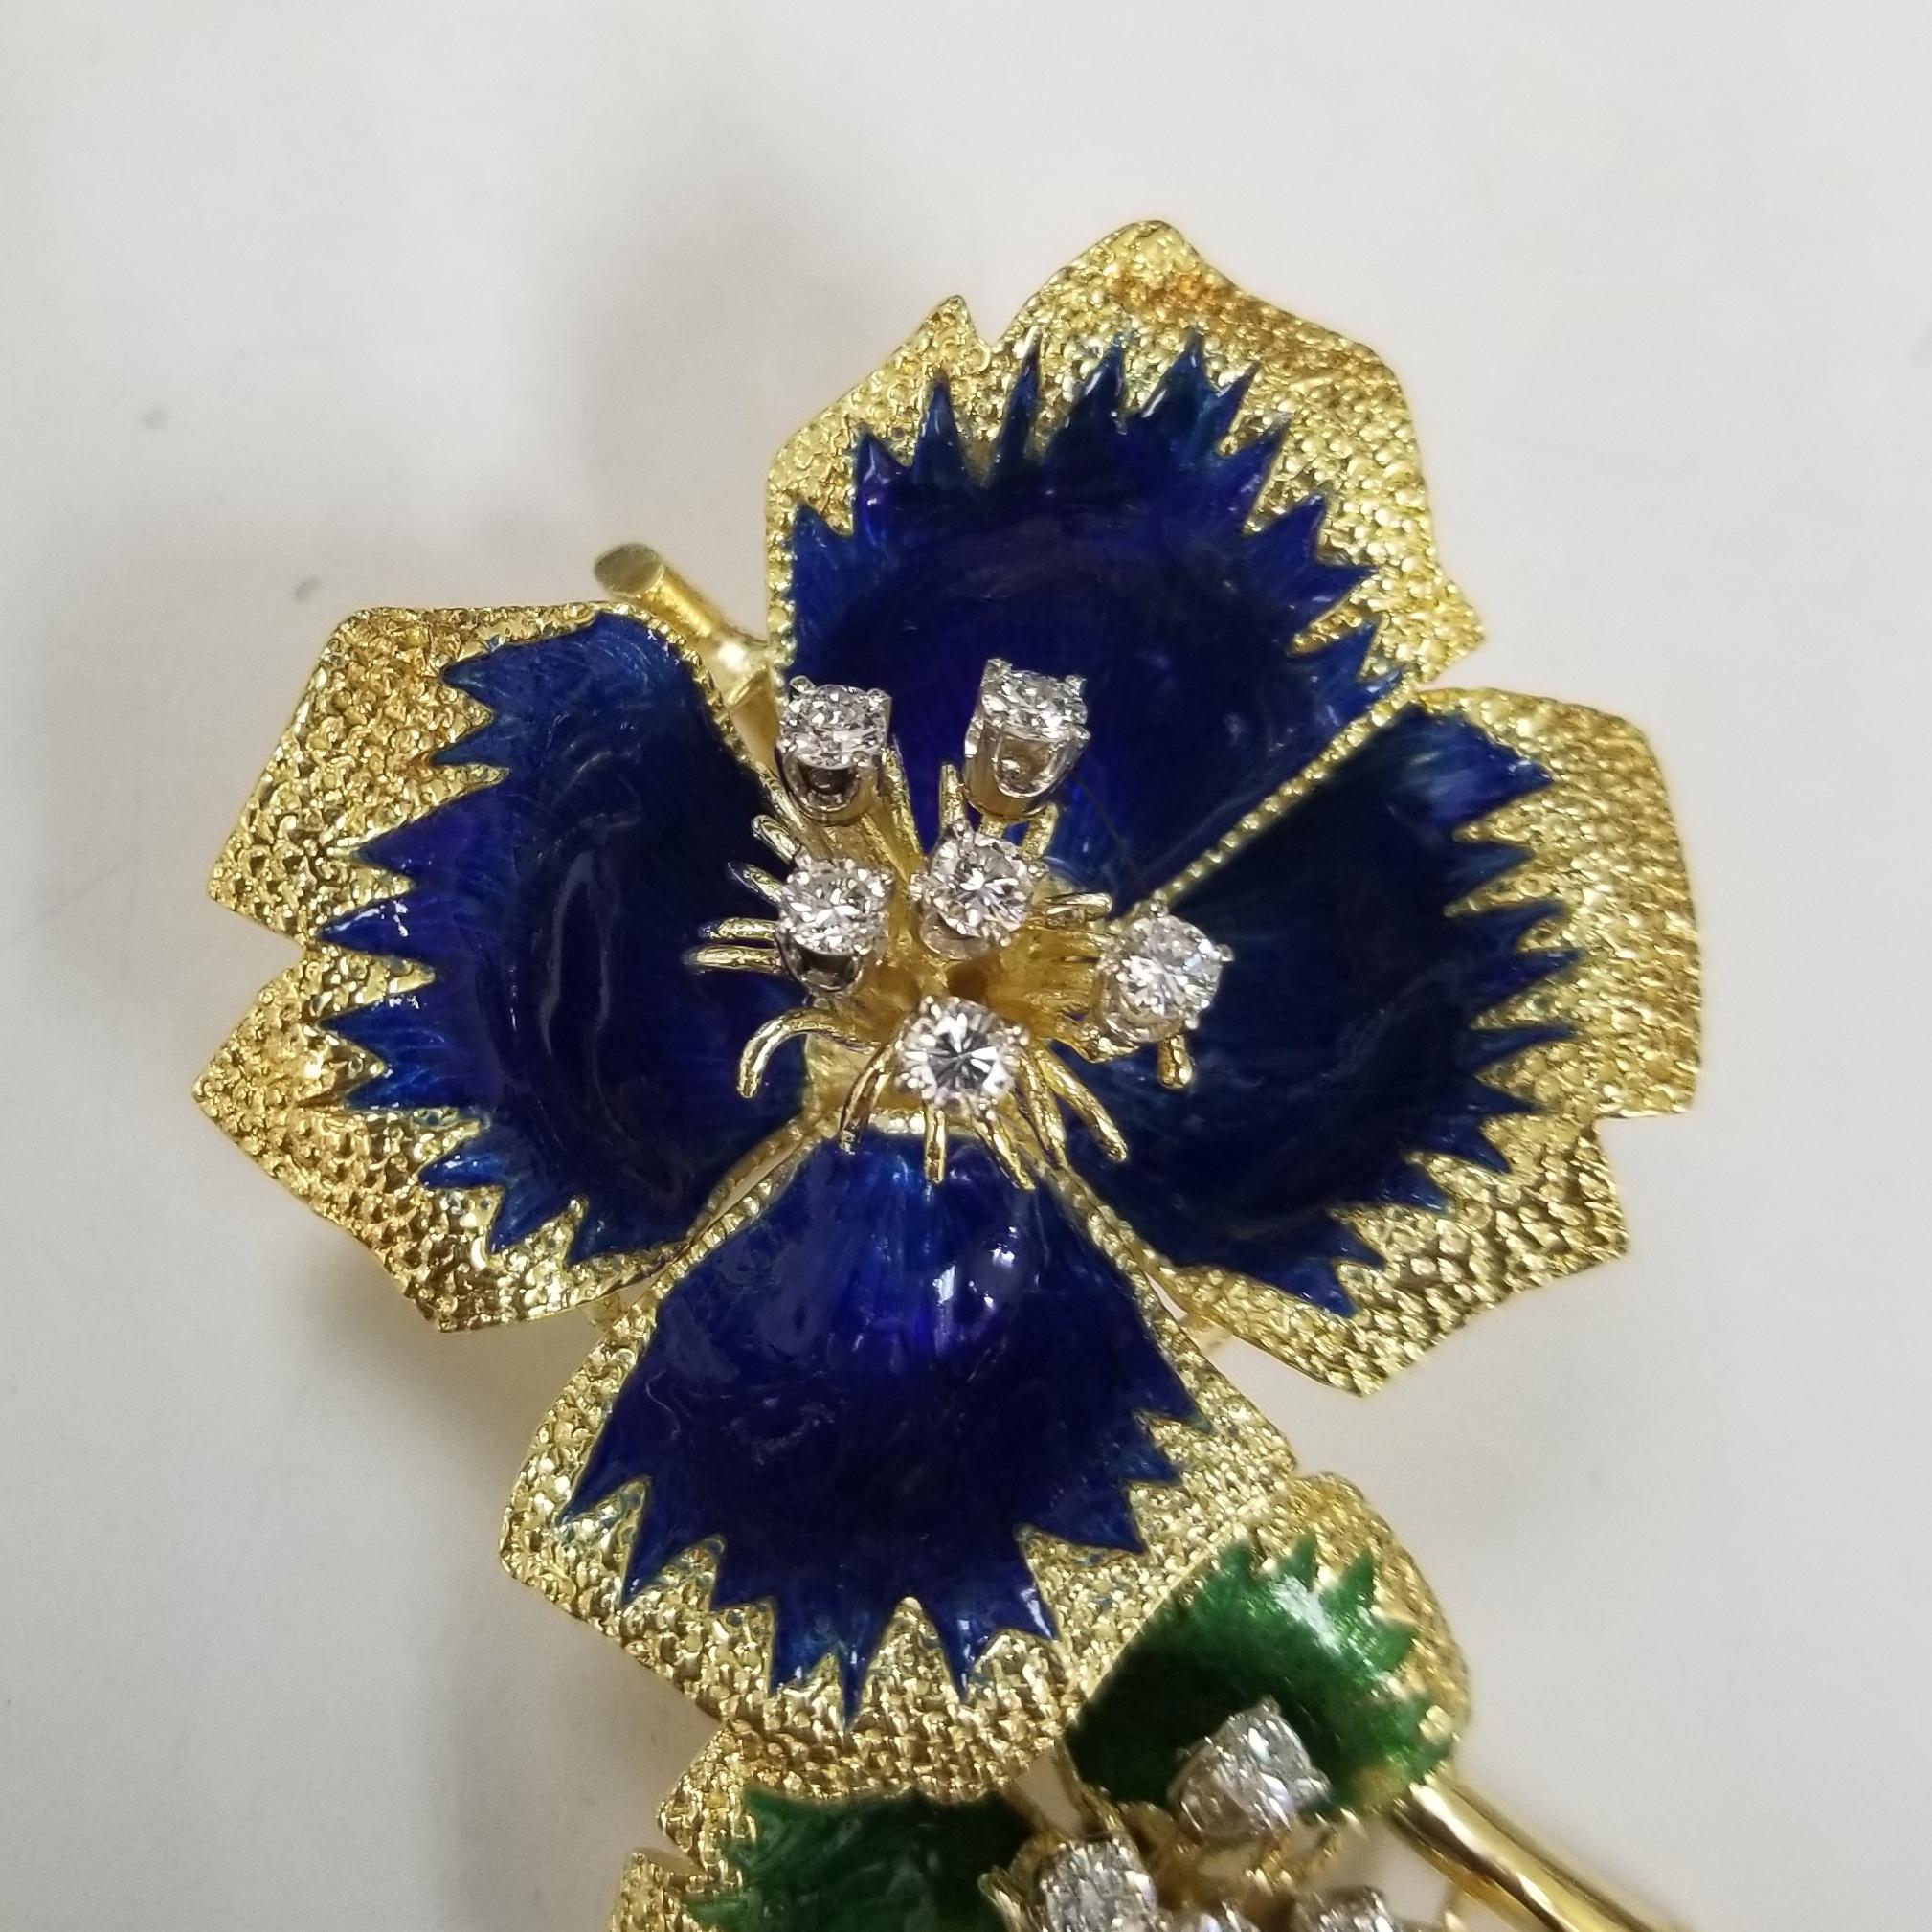 This one of a kind 18kt yellow gold with blue and green enamel flower brooch is a must have addition to your jewellery box. The perfect gift for a loved one this stunning brooch has been delicately hand enameled with a vibrant blue and